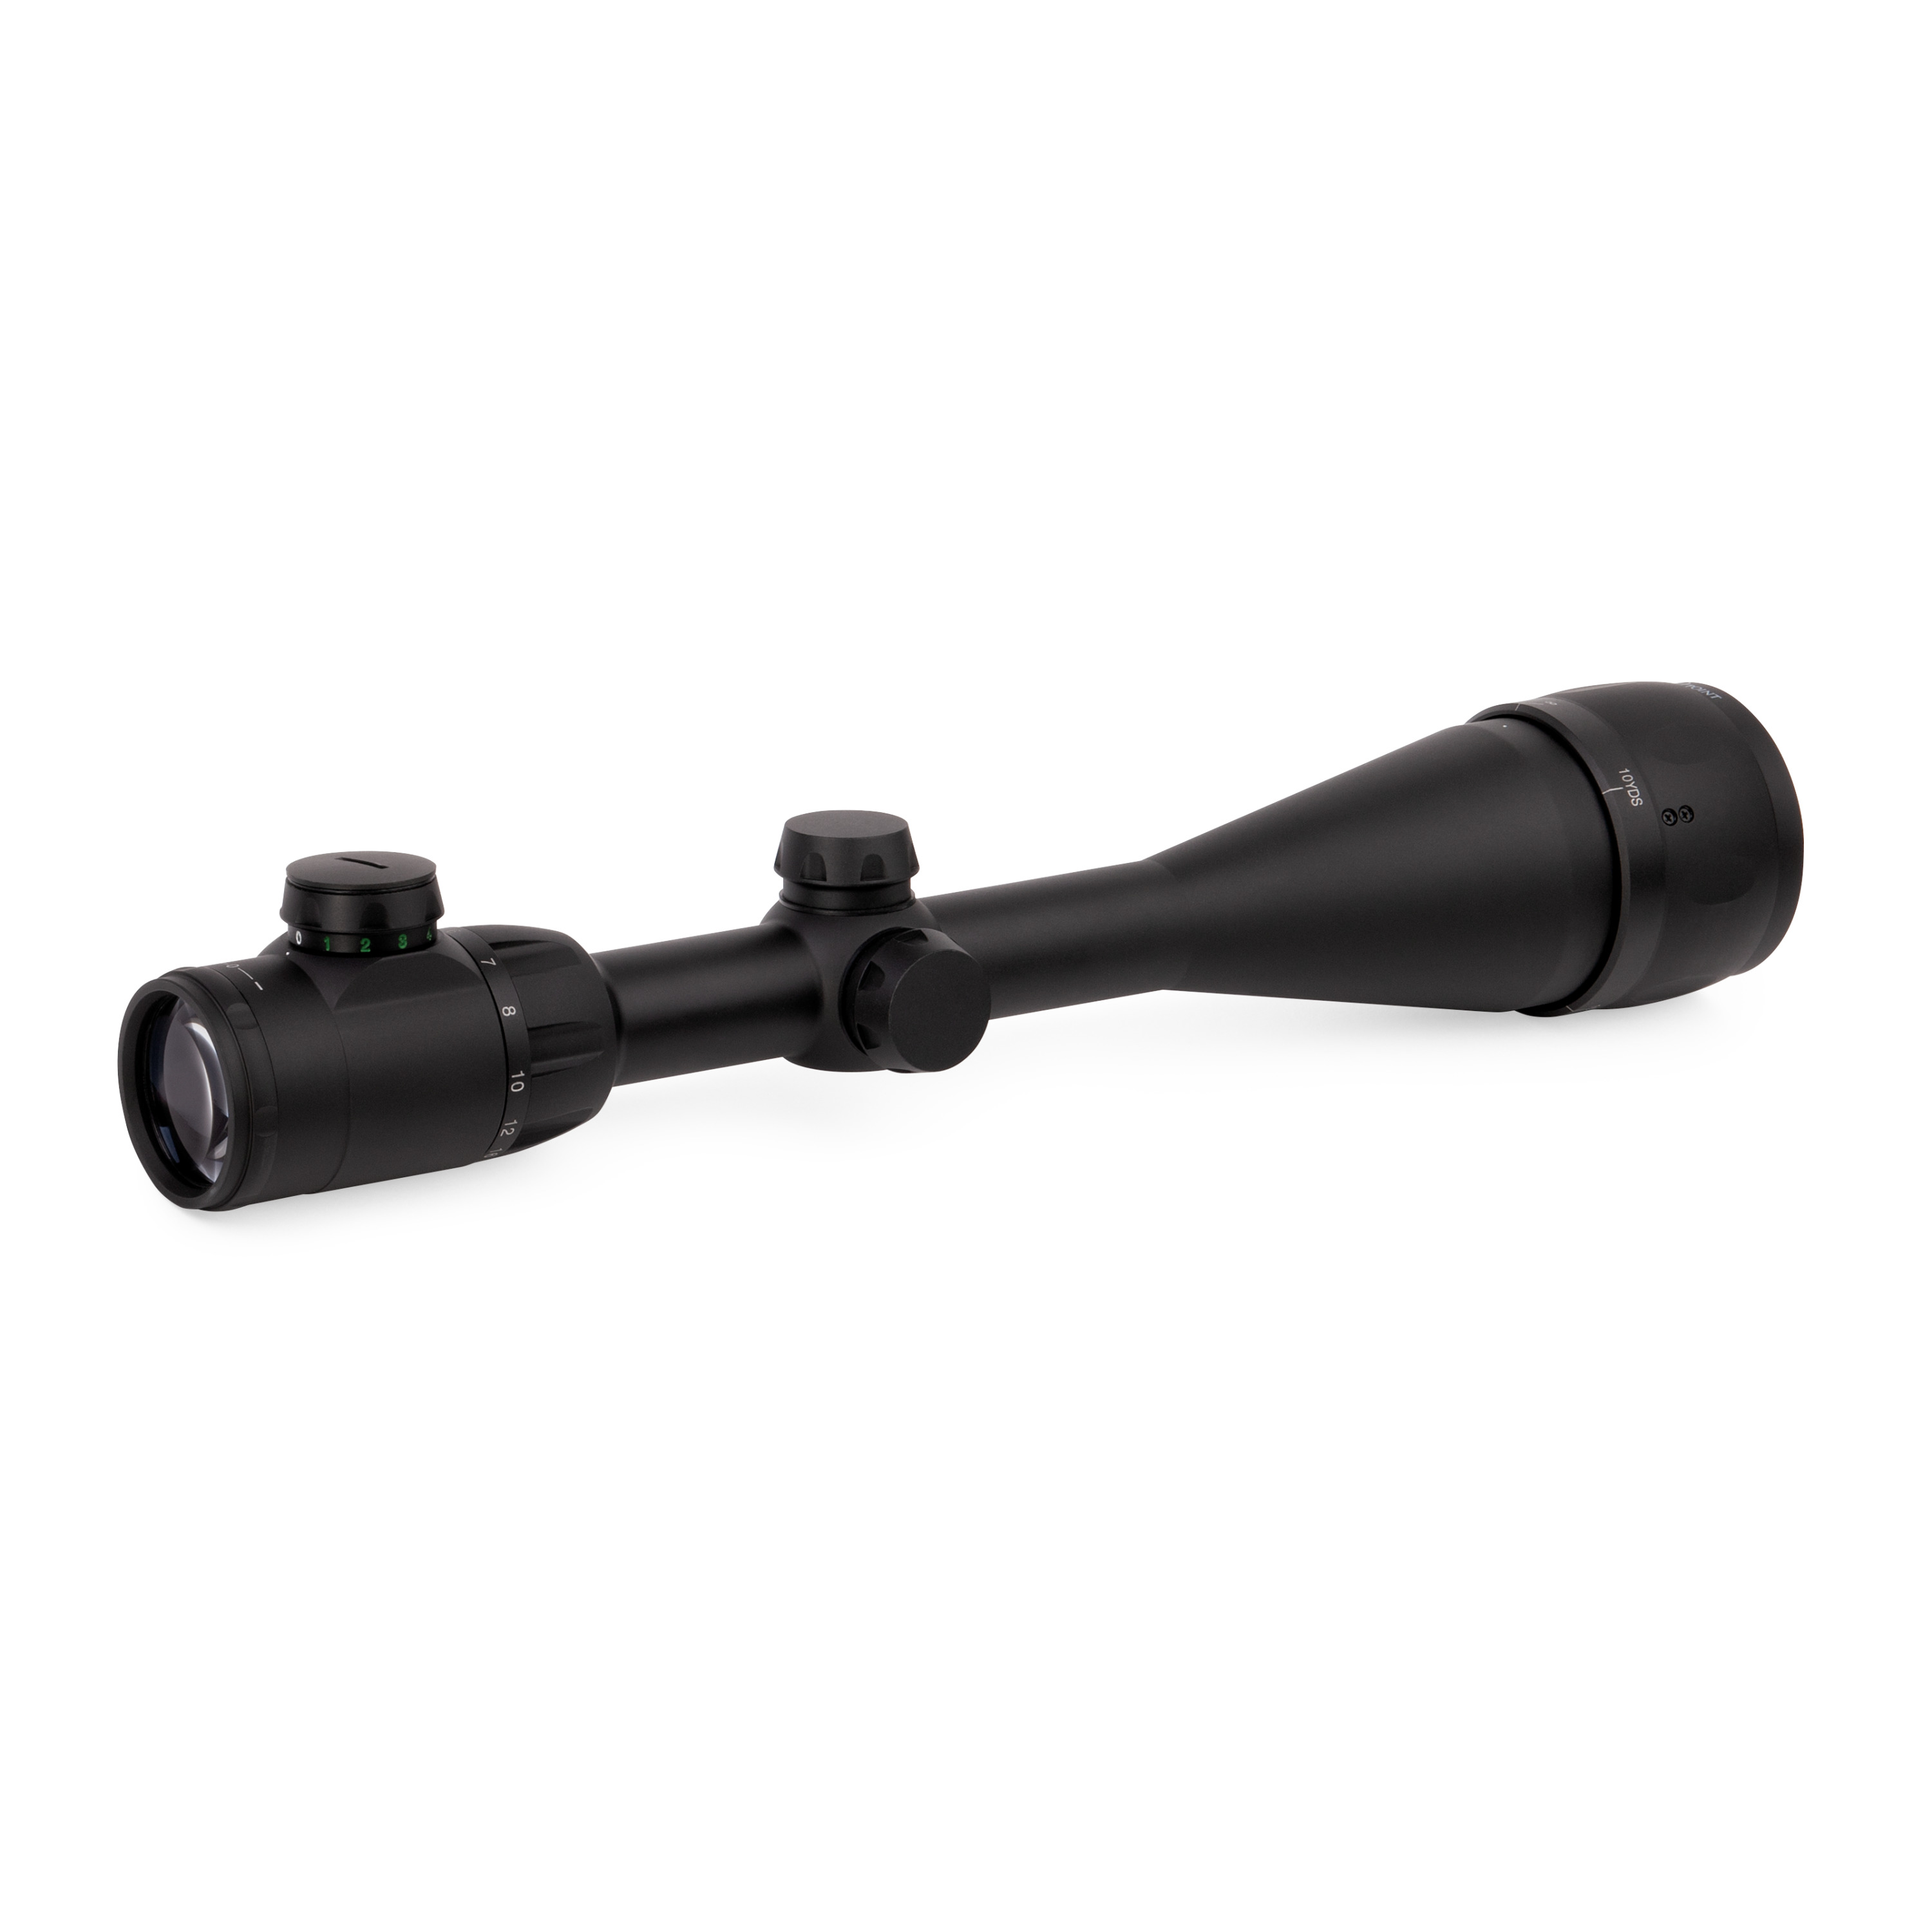 CenterPoint 6-20x50mm magnification, Riflescope with Tag and BDC Illuminated Reticle (Black) - image 2 of 14